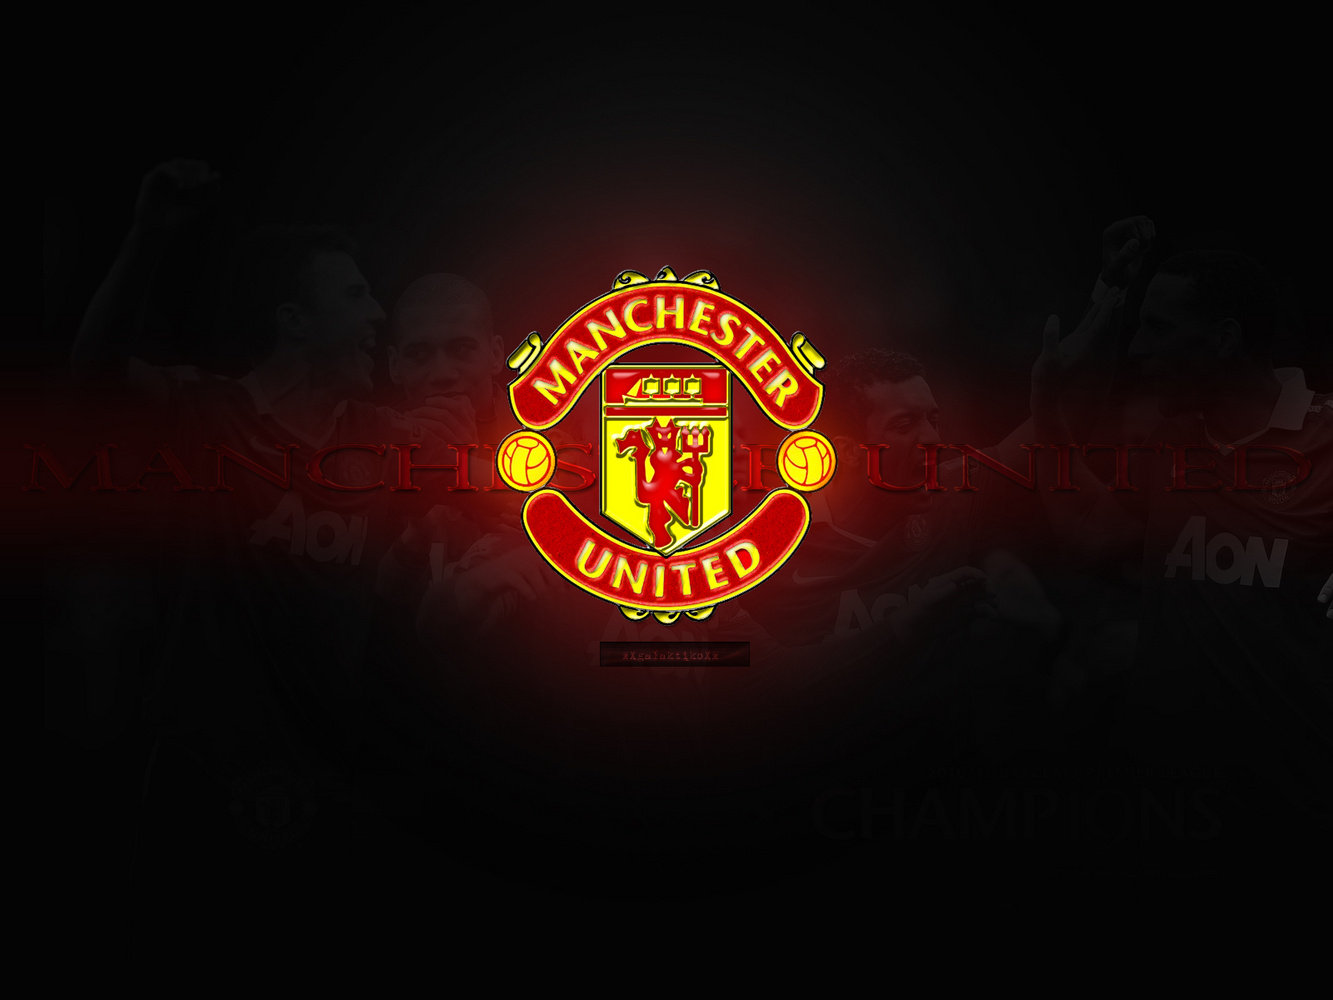 manchester united wallpaper download free - HD Widescreen Wallpapers